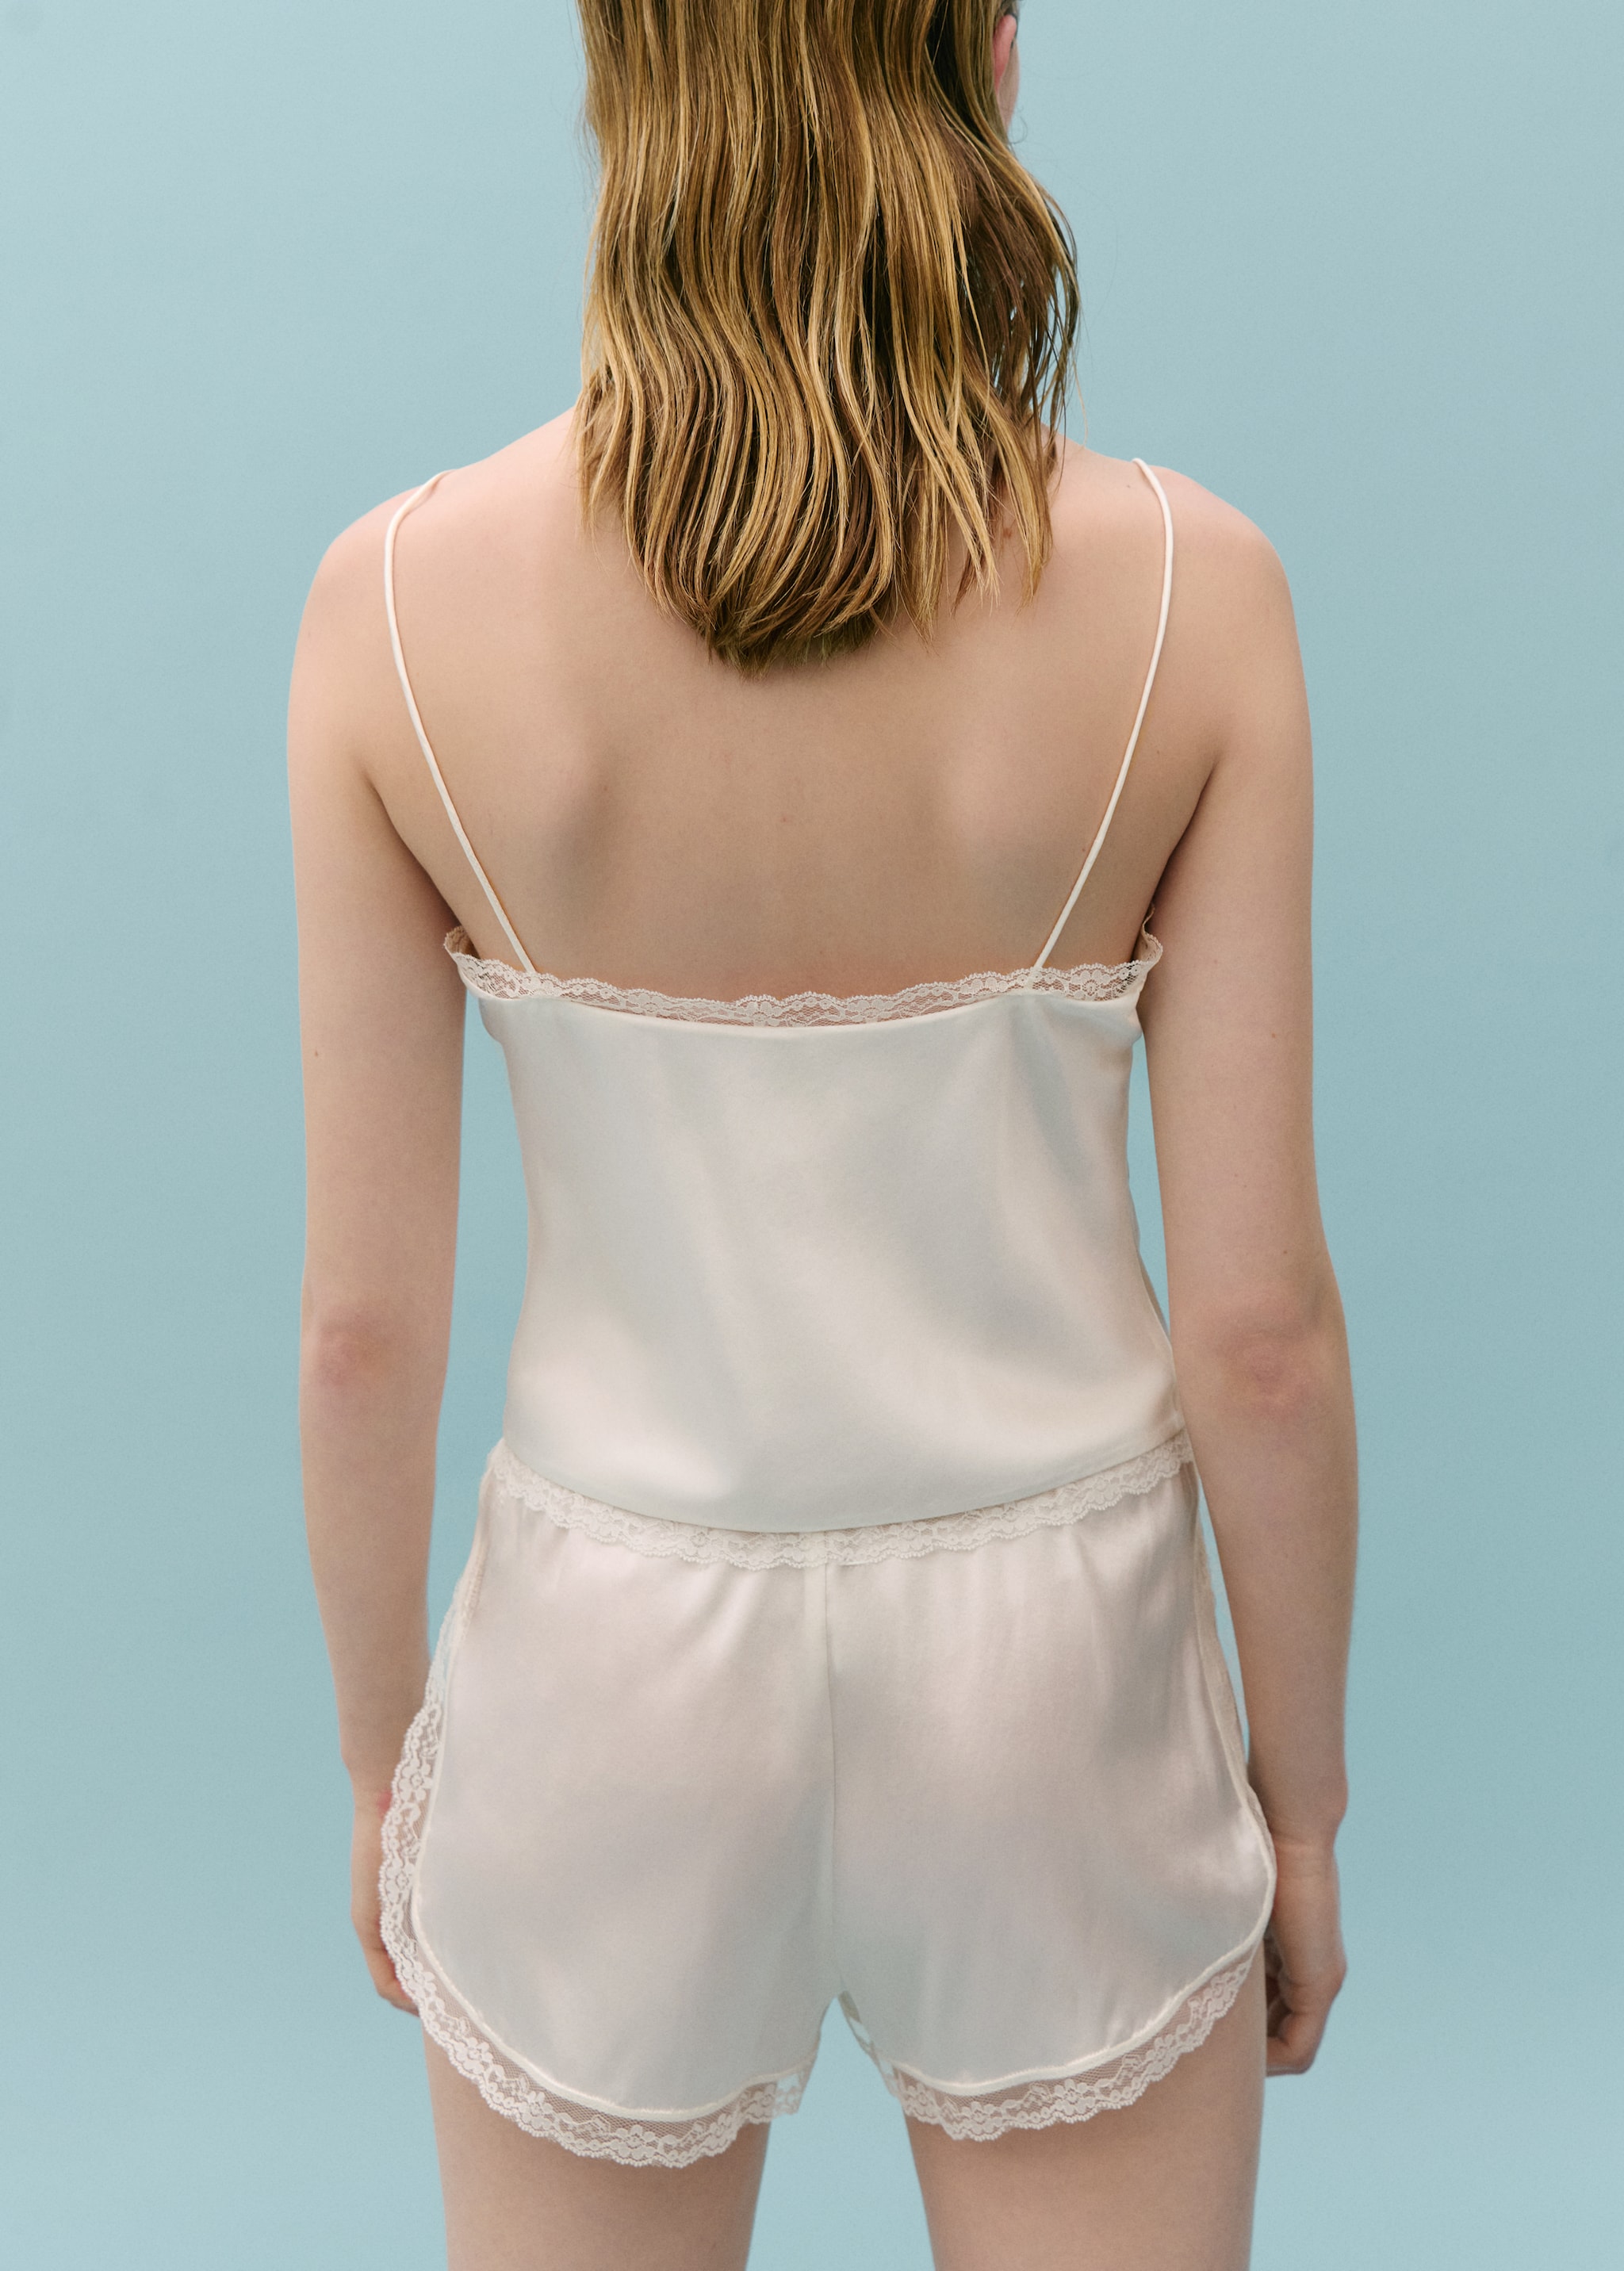 Silk lingerie shorts - Reverse of the article